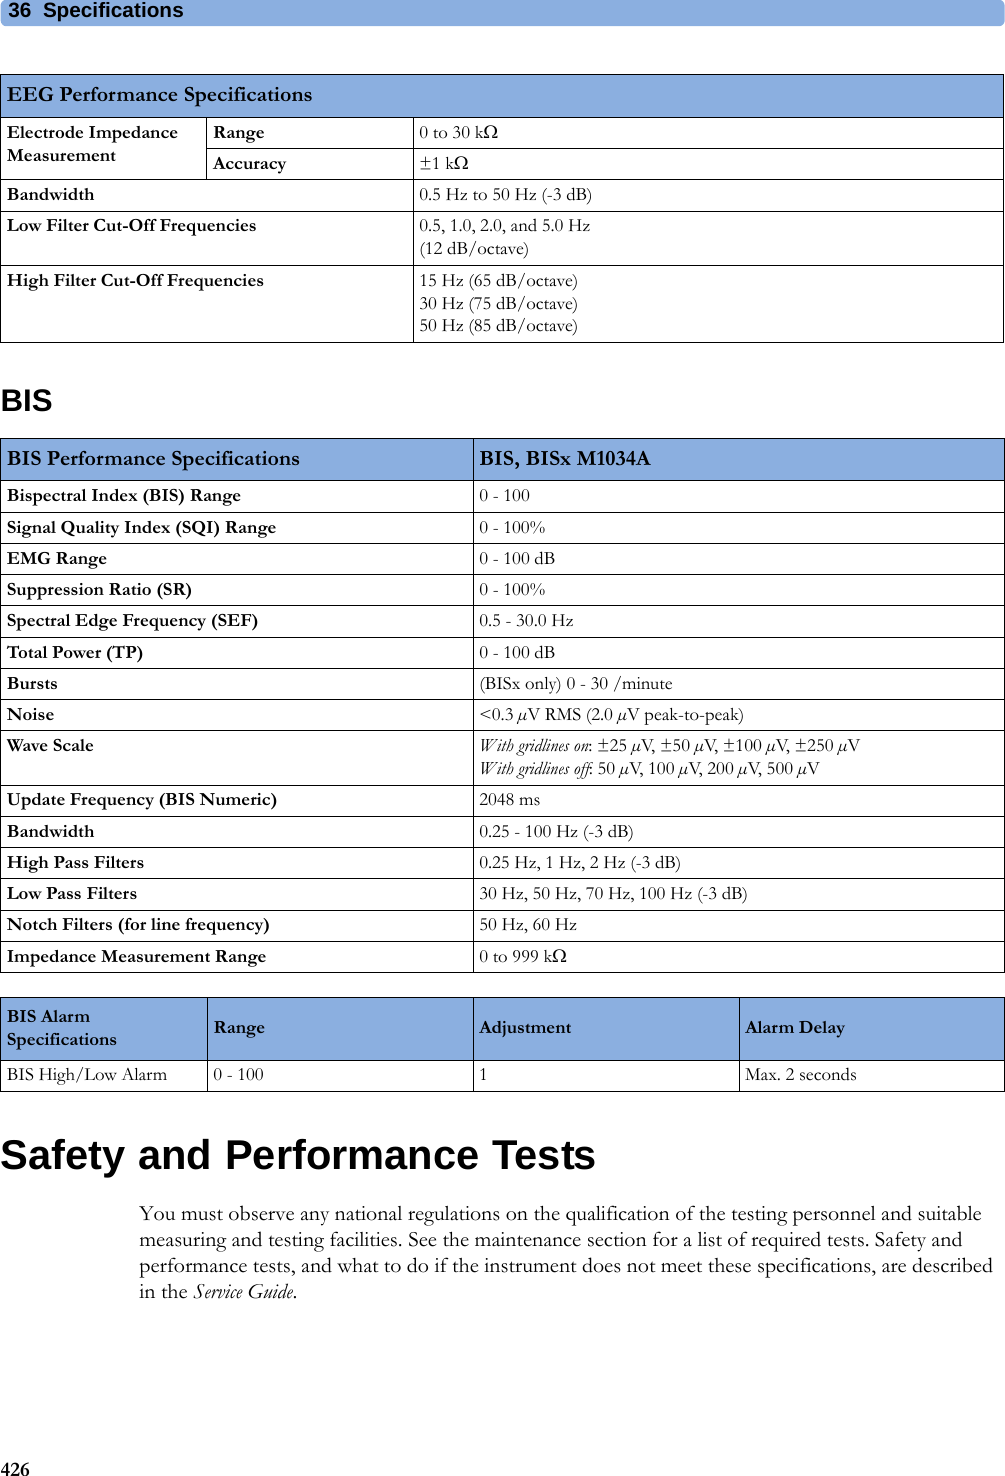 36 Specifications426BISSafety and Performance TestsYou must observe any national regulations on the qualification of the testing personnel and suitable measuring and testing facilities. See the maintenance section for a list of required tests. Safety and performance tests, and what to do if the instrument does not meet these specifications, are described in the Service Guide.Electrode Impedance MeasurementRange 0 to 30 kΩAccuracy ±1 kΩBandwidth 0.5 Hz to 50 Hz (-3 dB)Low Filter Cut-Off Frequencies 0.5, 1.0, 2.0, and 5.0 Hz (12 dB/octave)High Filter Cut-Off Frequencies 15 Hz (65 dB/octave)30 Hz (75 dB/octave)50 Hz (85 dB/octave)EEG Performance SpecificationsBIS Performance Specifications BIS, BISx M1034ABispectral Index (BIS) Range 0 - 100Signal Quality Index (SQI) Range 0 - 100%EMG Range 0 - 100 dBSuppression Ratio (SR) 0 - 100%Spectral Edge Frequency (SEF) 0.5 - 30.0 HzTotal Powe r (TP) 0 - 100 dBBursts (BISx only) 0 - 30 /minuteNoise &lt;0.3 µV RMS (2.0 µV peak-to-peak)Wave Scale With gridlines on: ±25 µV, ± 5 0 µV, ± 1 0 0 µV,  ± 2 5 0 µVWith gridlines off: 50 µV,  1 0 0 µV,  2 0 0 µV,  5 0 0 µVUpdate Frequency (BIS Numeric) 2048 msBandwidth 0.25 - 100 Hz (-3 dB)High Pass Filters 0.25 Hz, 1 Hz, 2 Hz (-3 dB)Low Pass Filters 30 Hz, 50 Hz, 70 Hz, 100 Hz (-3 dB)Notch Filters (for line frequency) 50 Hz, 60 HzImpedance Measurement Range 0 to 999 kΩBIS Alarm Specifications Range Adjustment Alarm DelayBIS High/Low Alarm 0 - 100 1 Max. 2 seconds